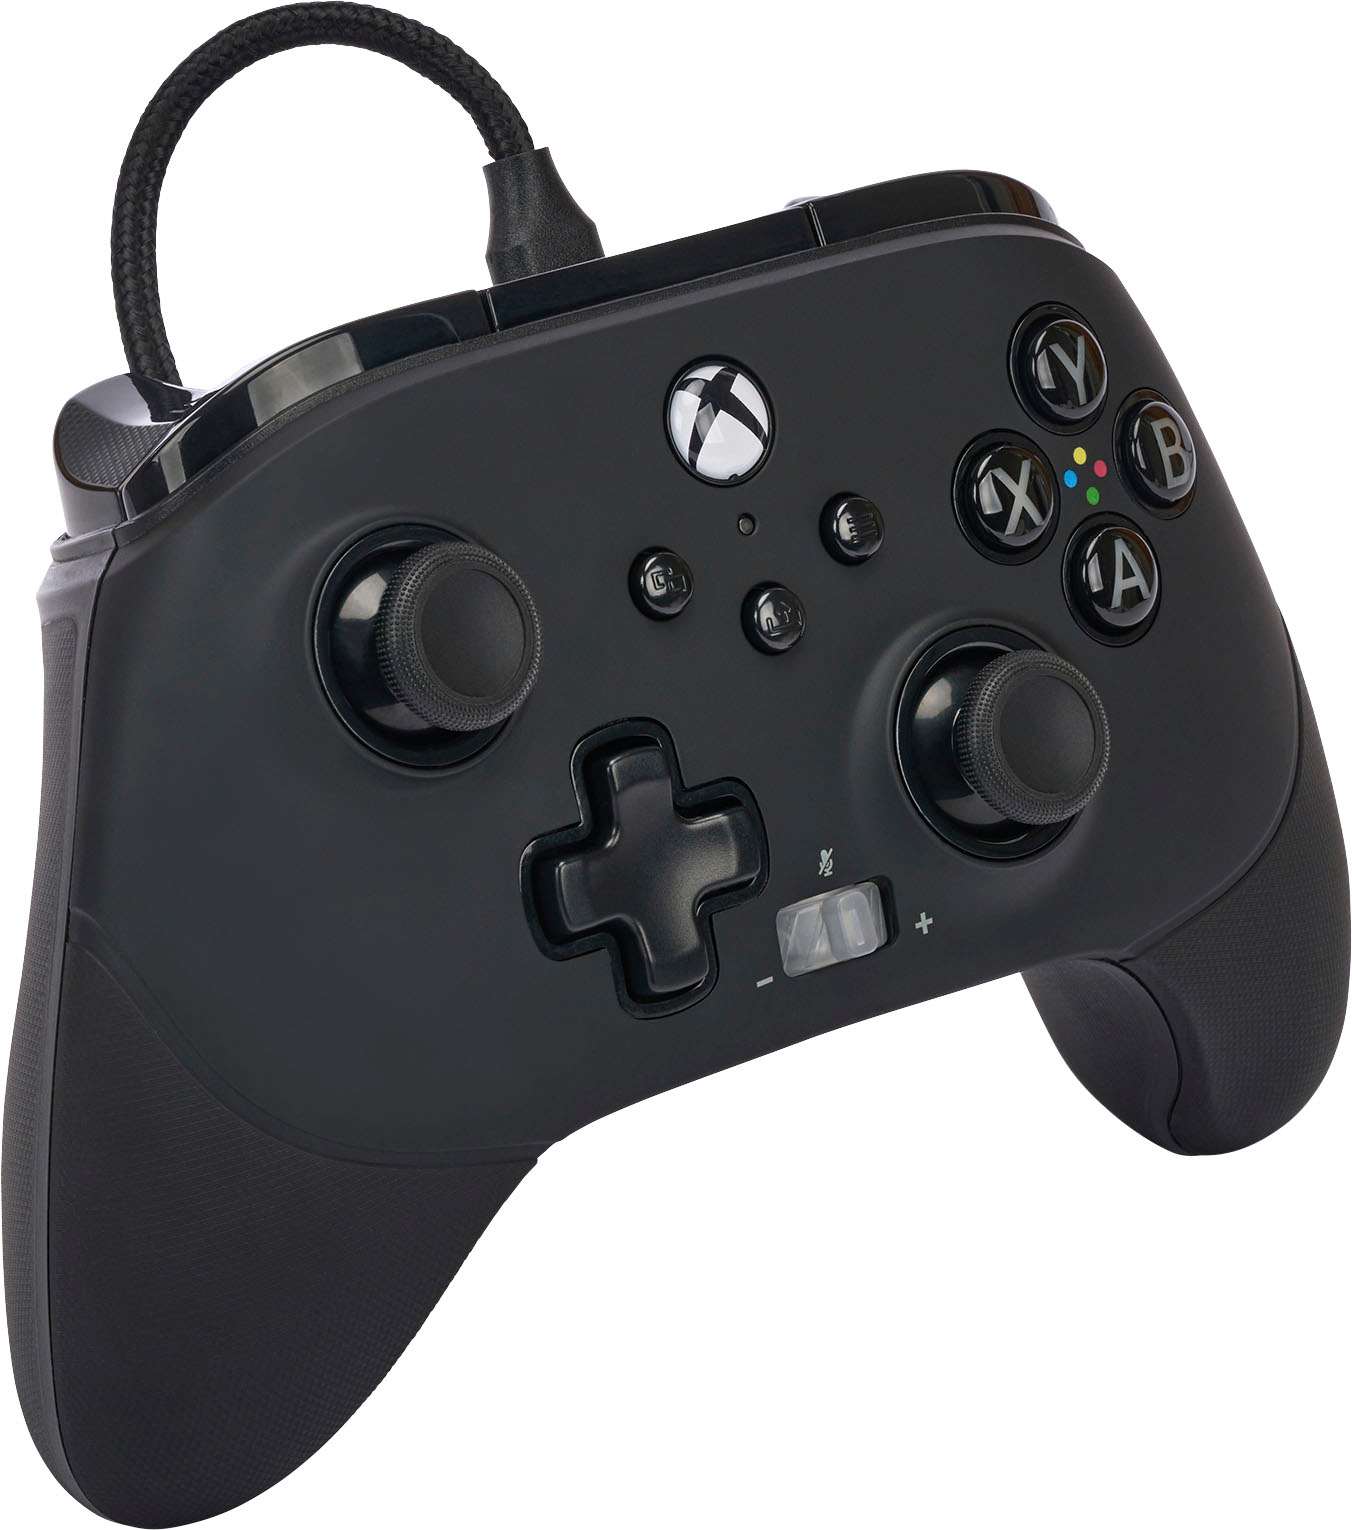 PowerA FUSION Pro 3 Wired Controller for Xbox Series X